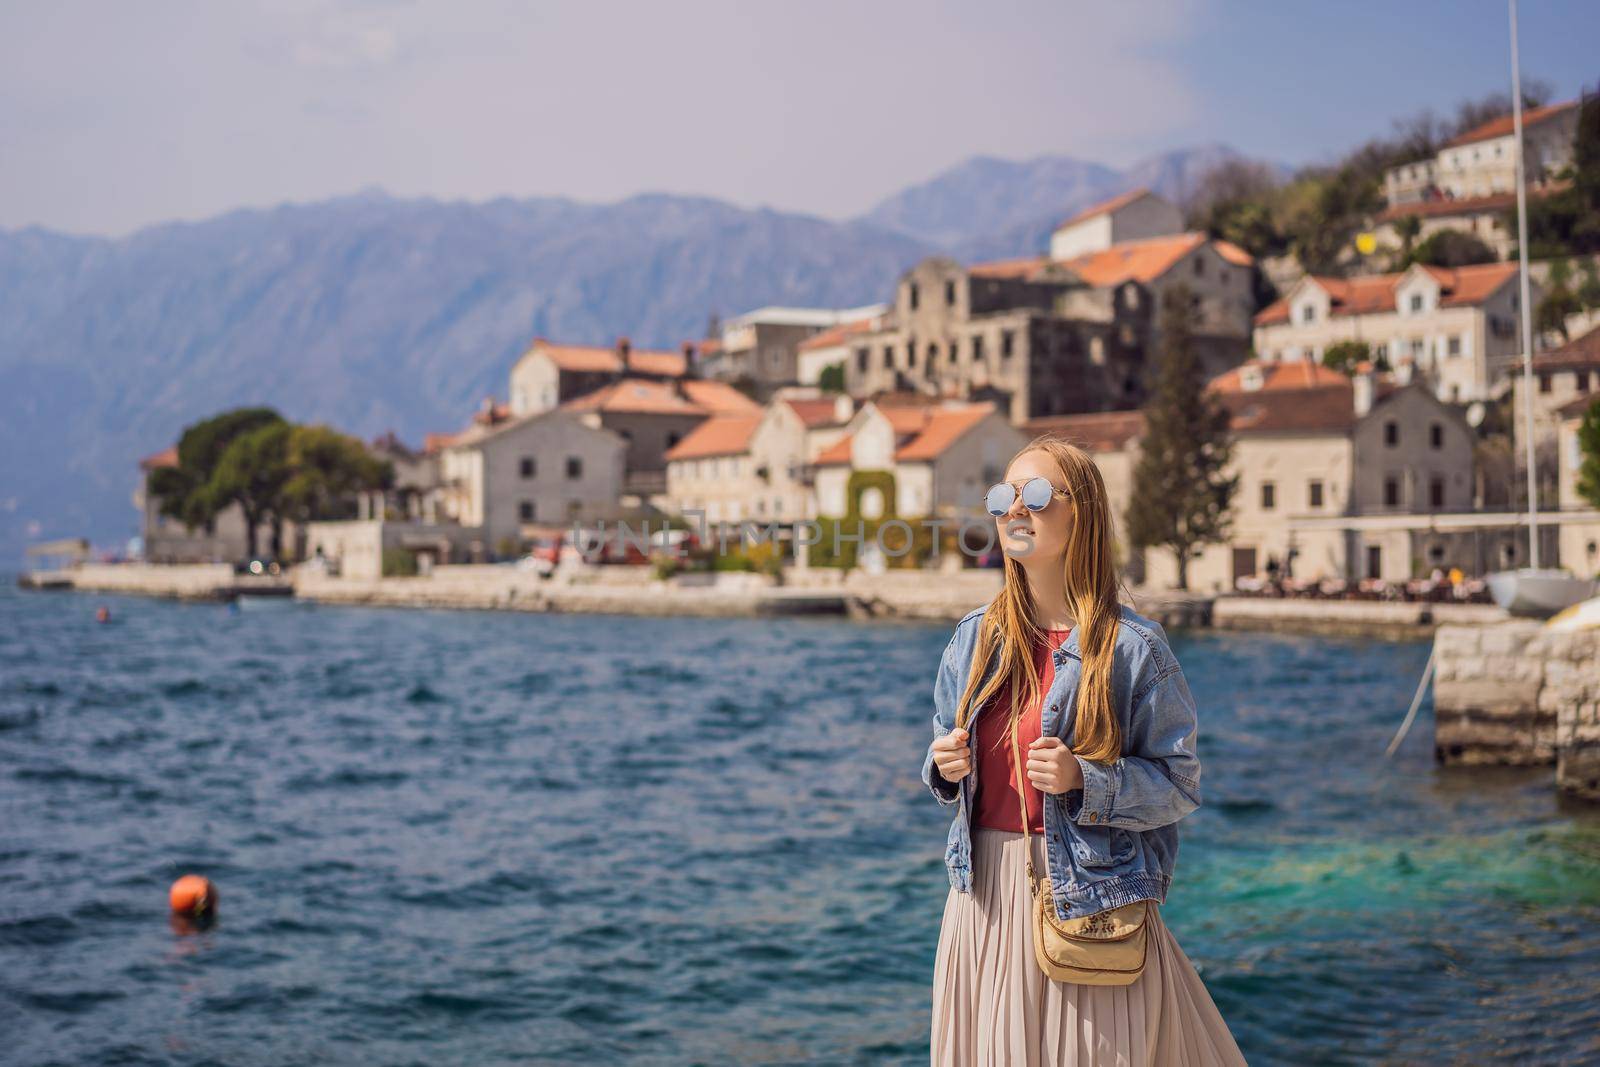 Woman tourist enjoying Colorful street in Old town of Perast on a sunny day, Montenegro. Travel to Montenegro concept. Scenic panorama view of the historic town of Perast at famous Bay of Kotor on a beautiful sunny day with blue sky and clouds in summer, Montenegro, southern Europe by galitskaya